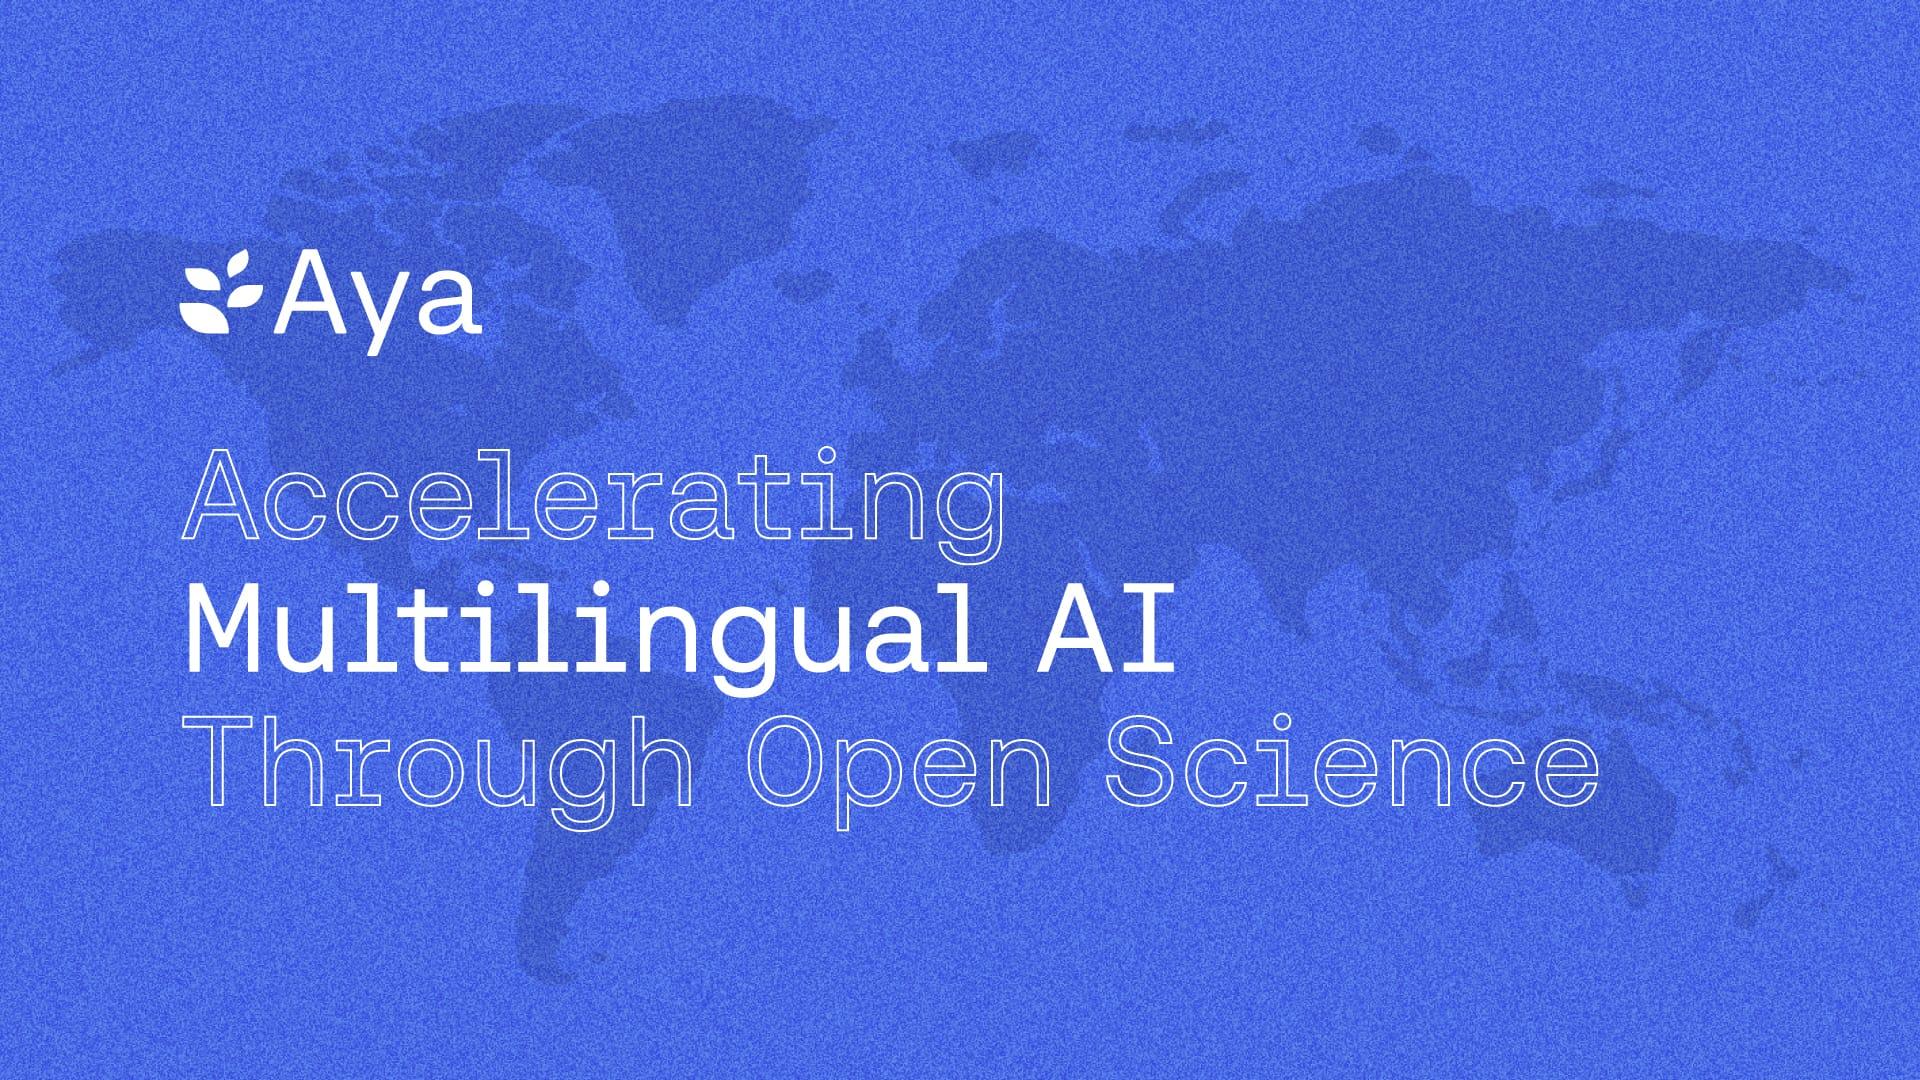 Cohere For AI Launches Aya, an LLM Covering More Than 100 Languages